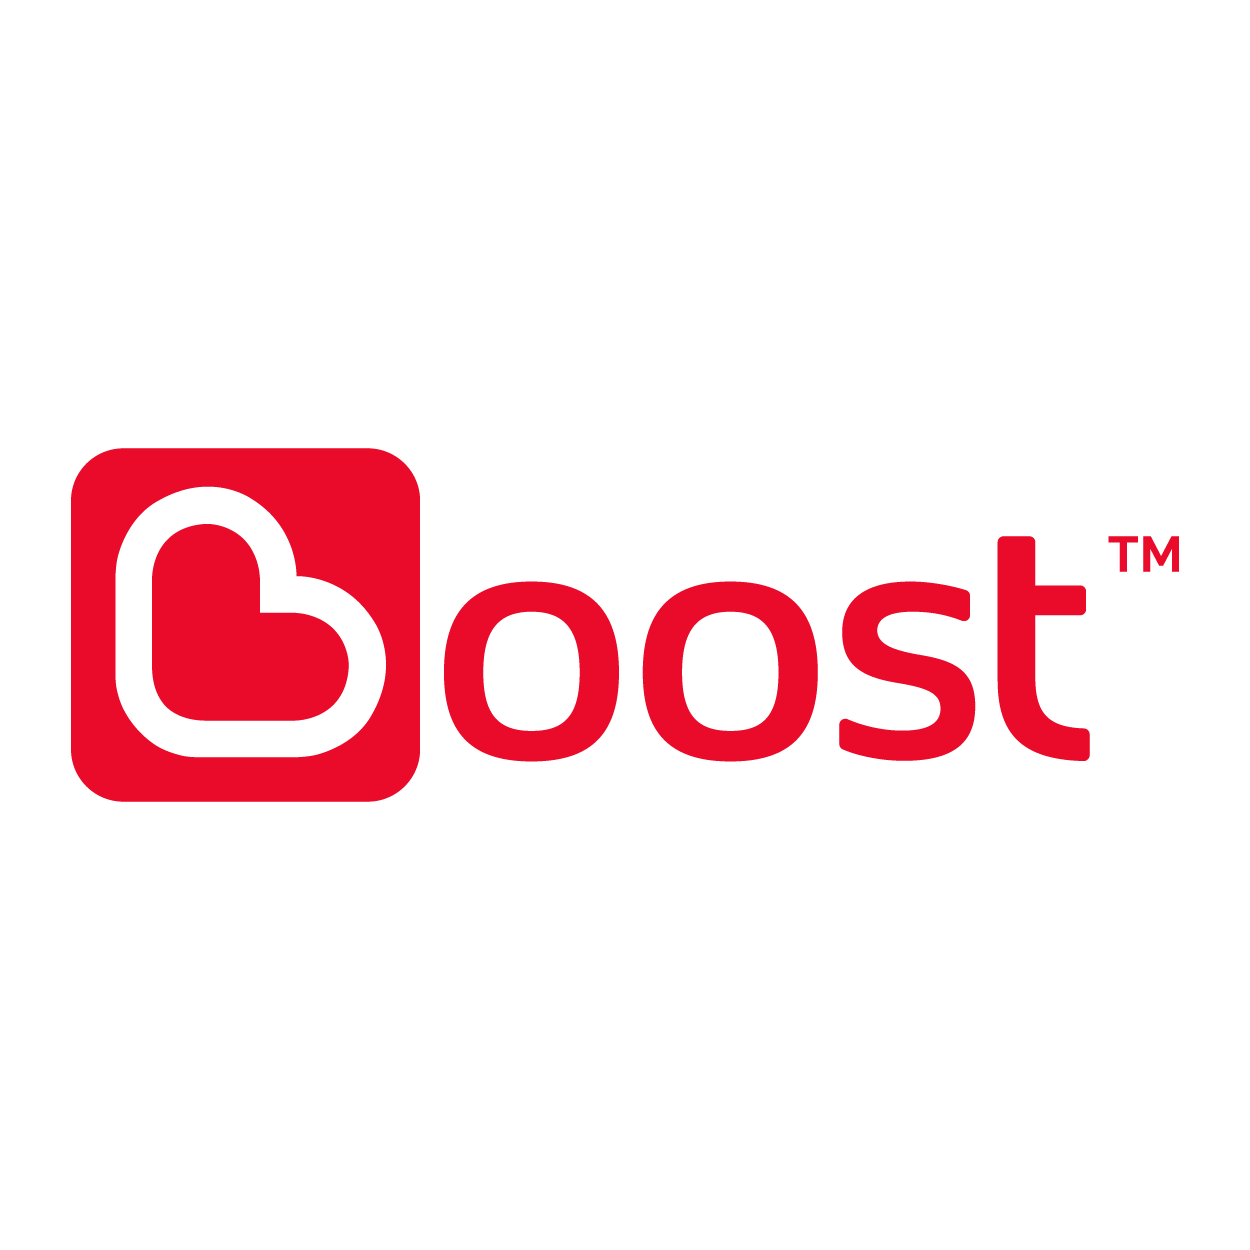 Convenient and fast payment with Boost.